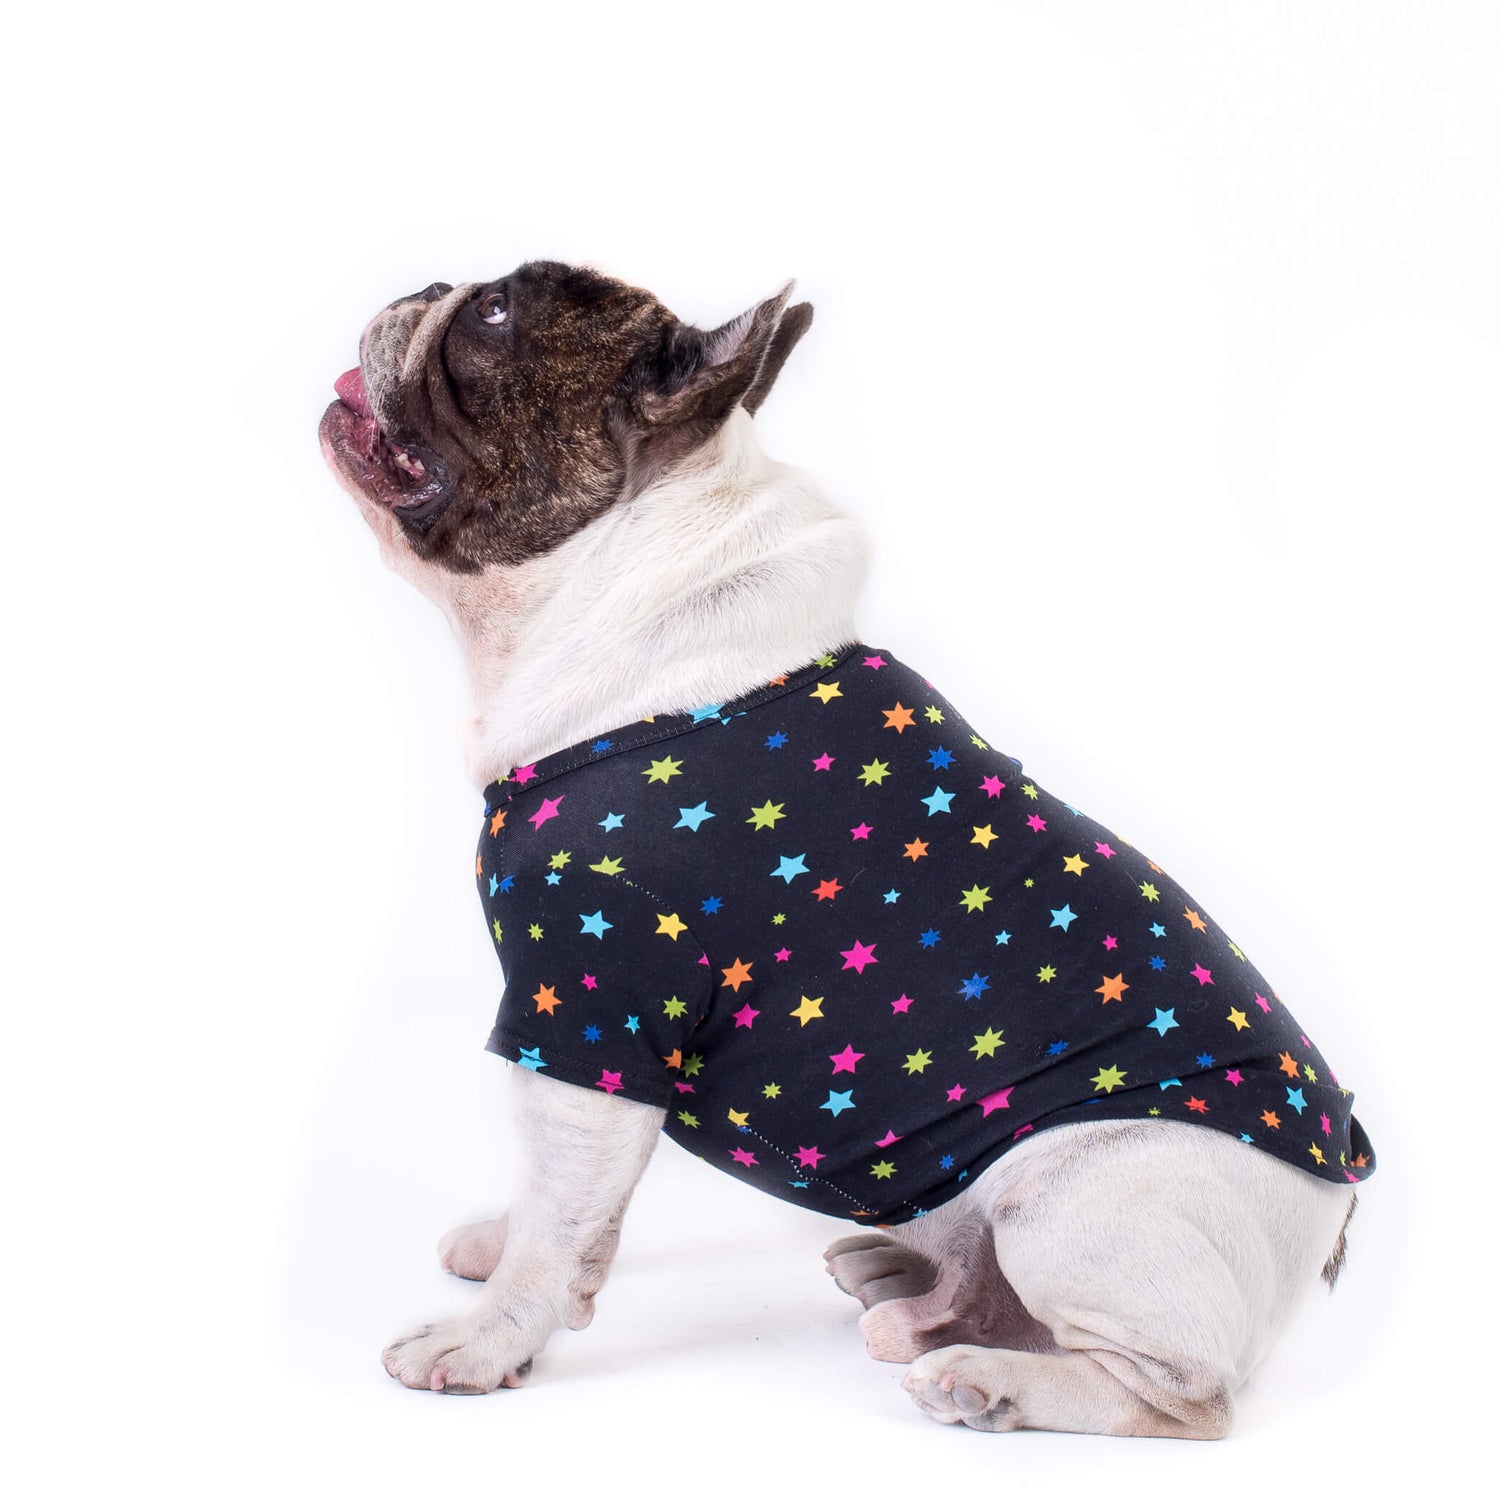 French Bulldog in star gazer dog shirt - Charming French Bulldog standing sideways in a black shirt with bright multi-colored stars - Enhance your Frenchie's style with the star gazer shirt - Shop now for trendy dog shirts and clothing with eye-catching designs.